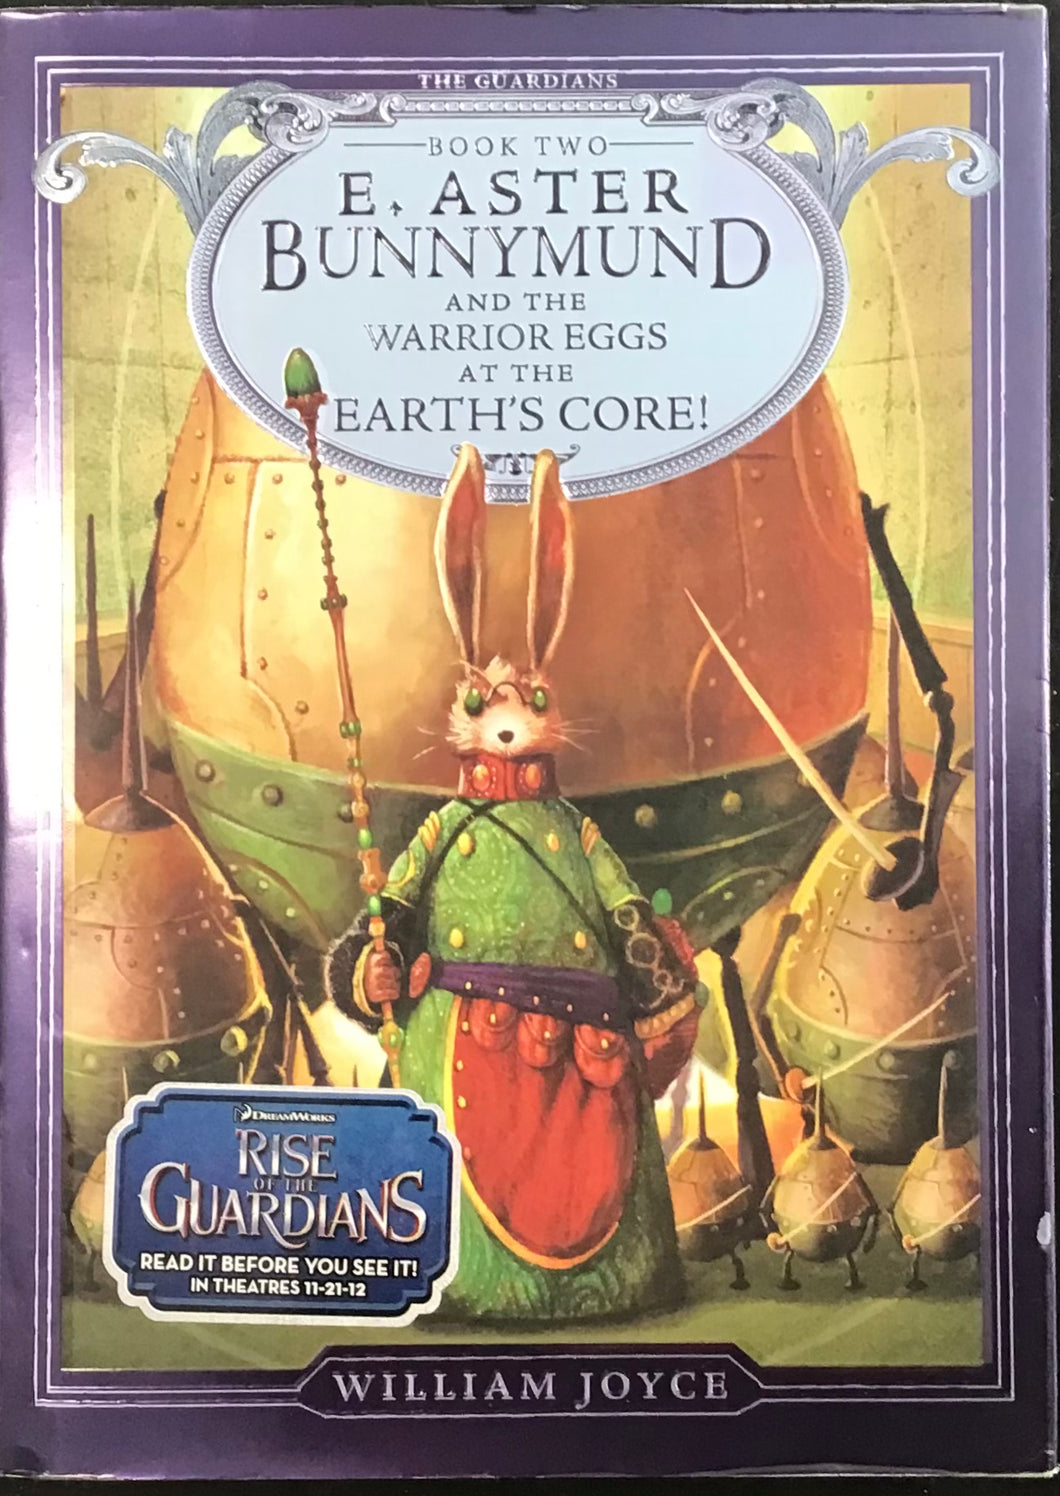 E. Aster Bunnymund and The Warrior Eggs At The Earth's Core, William Joyce